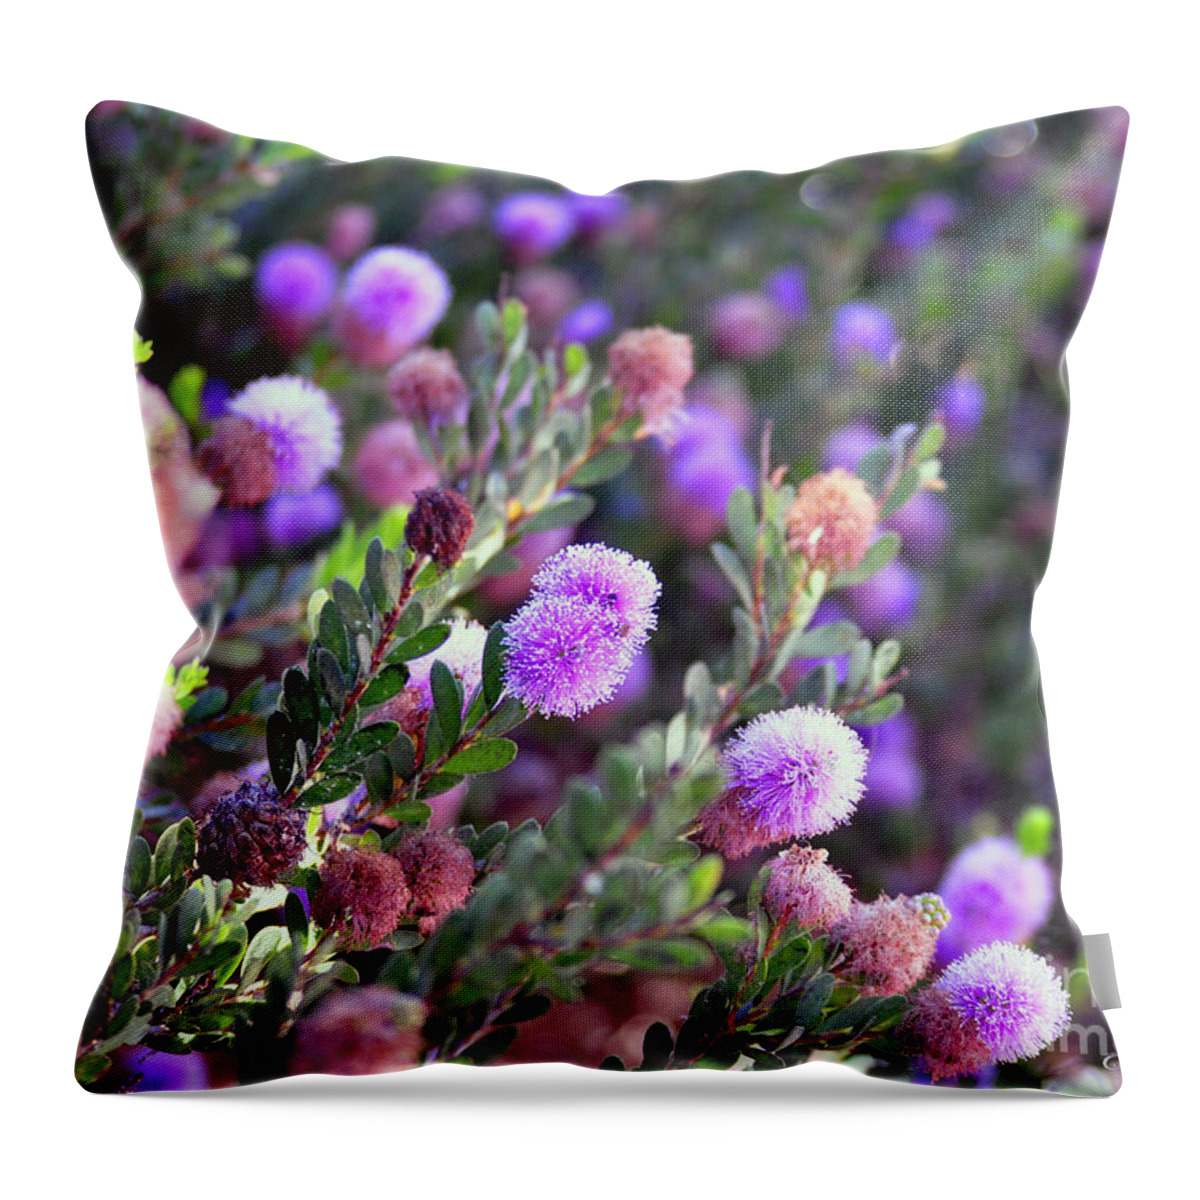 Clay Throw Pillow featuring the photograph Pink Fuzzy Balls by Clayton Bruster